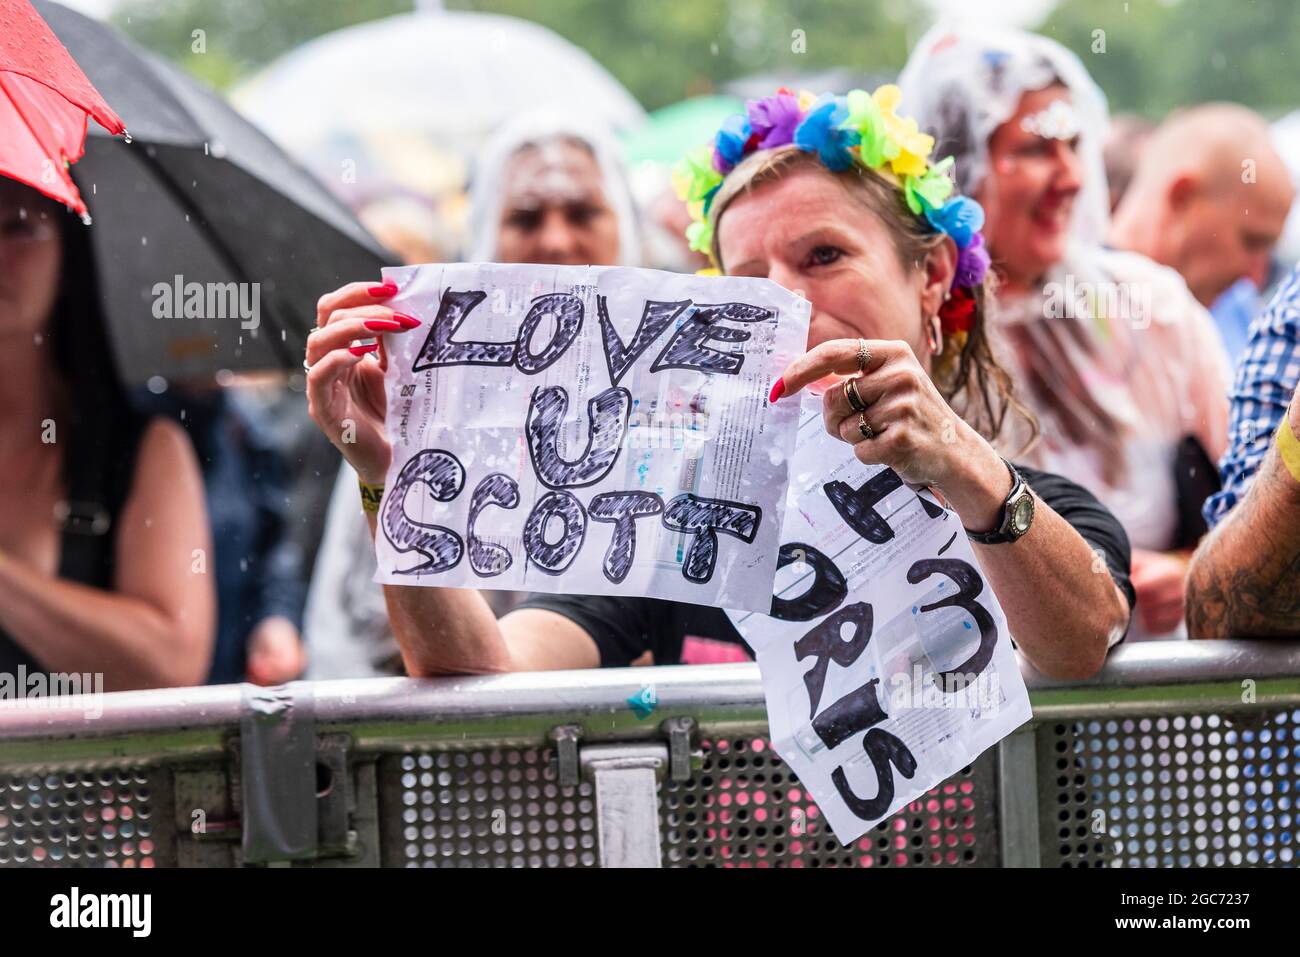 Female fan in the crowd at Fantasia music festival showing her love for Scott Robinson of the band Five, or 5ive, as they play on stage. I'm Doris Stock Photo